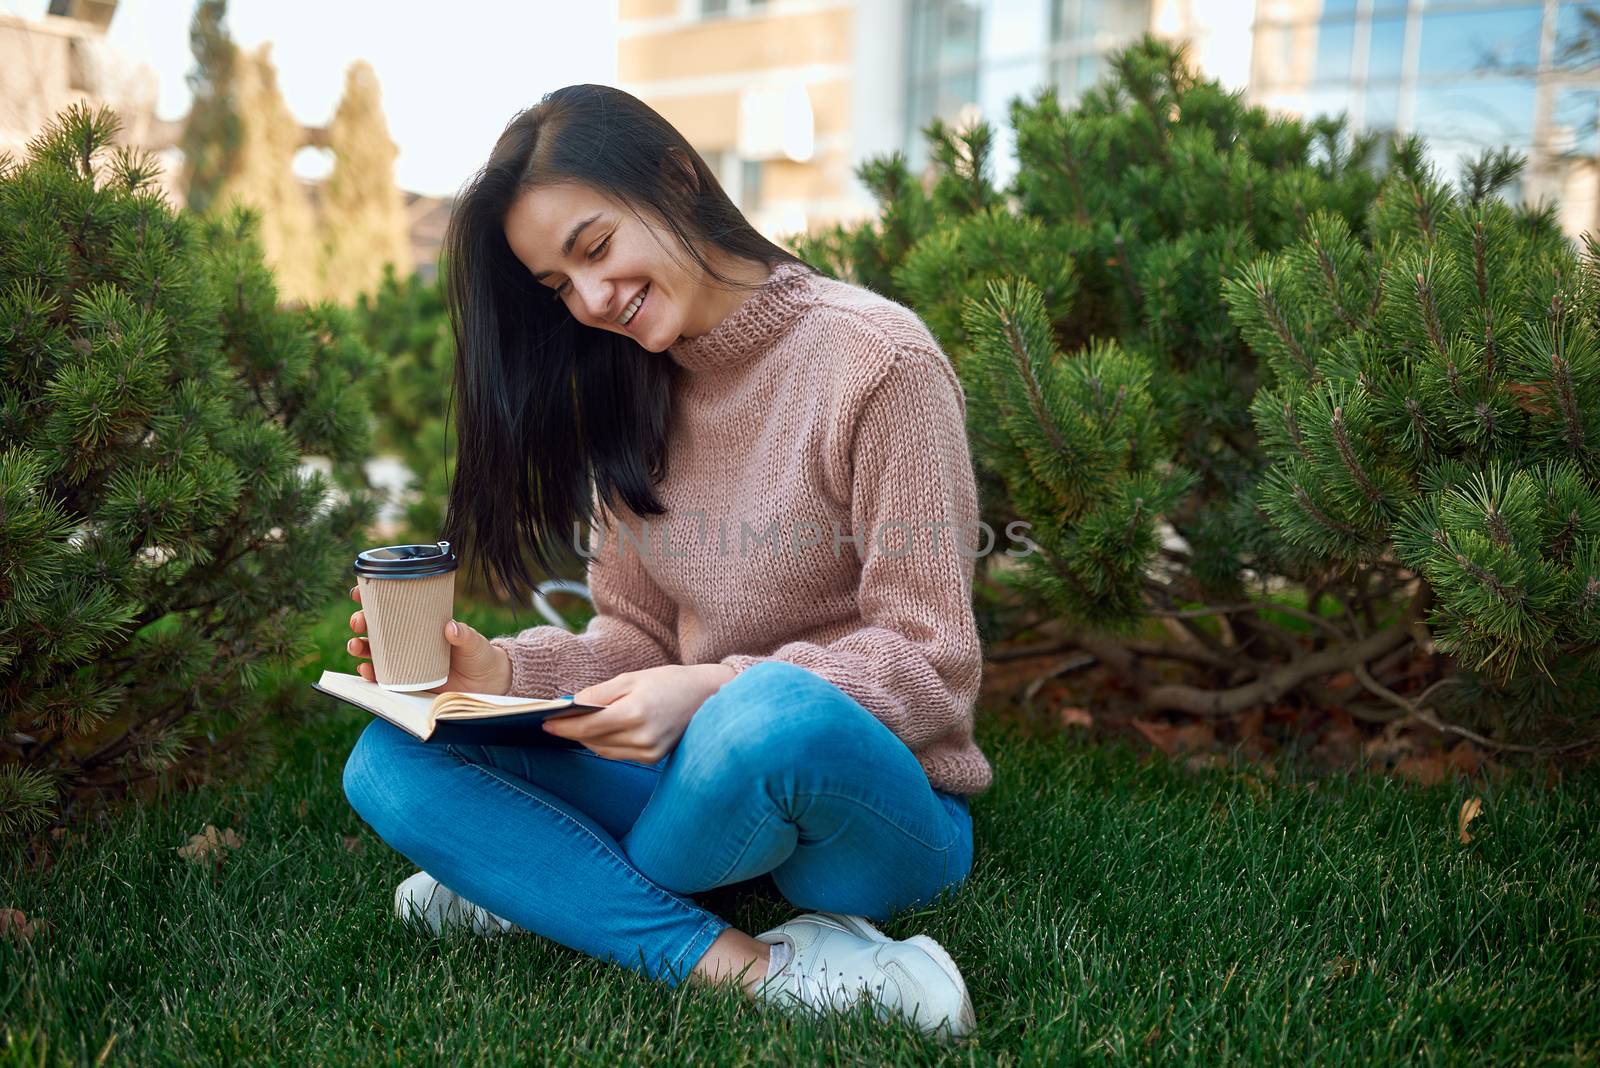 Adorable young lady enjoying an exciting novel and spending time with it outdoors on a green grass lawn